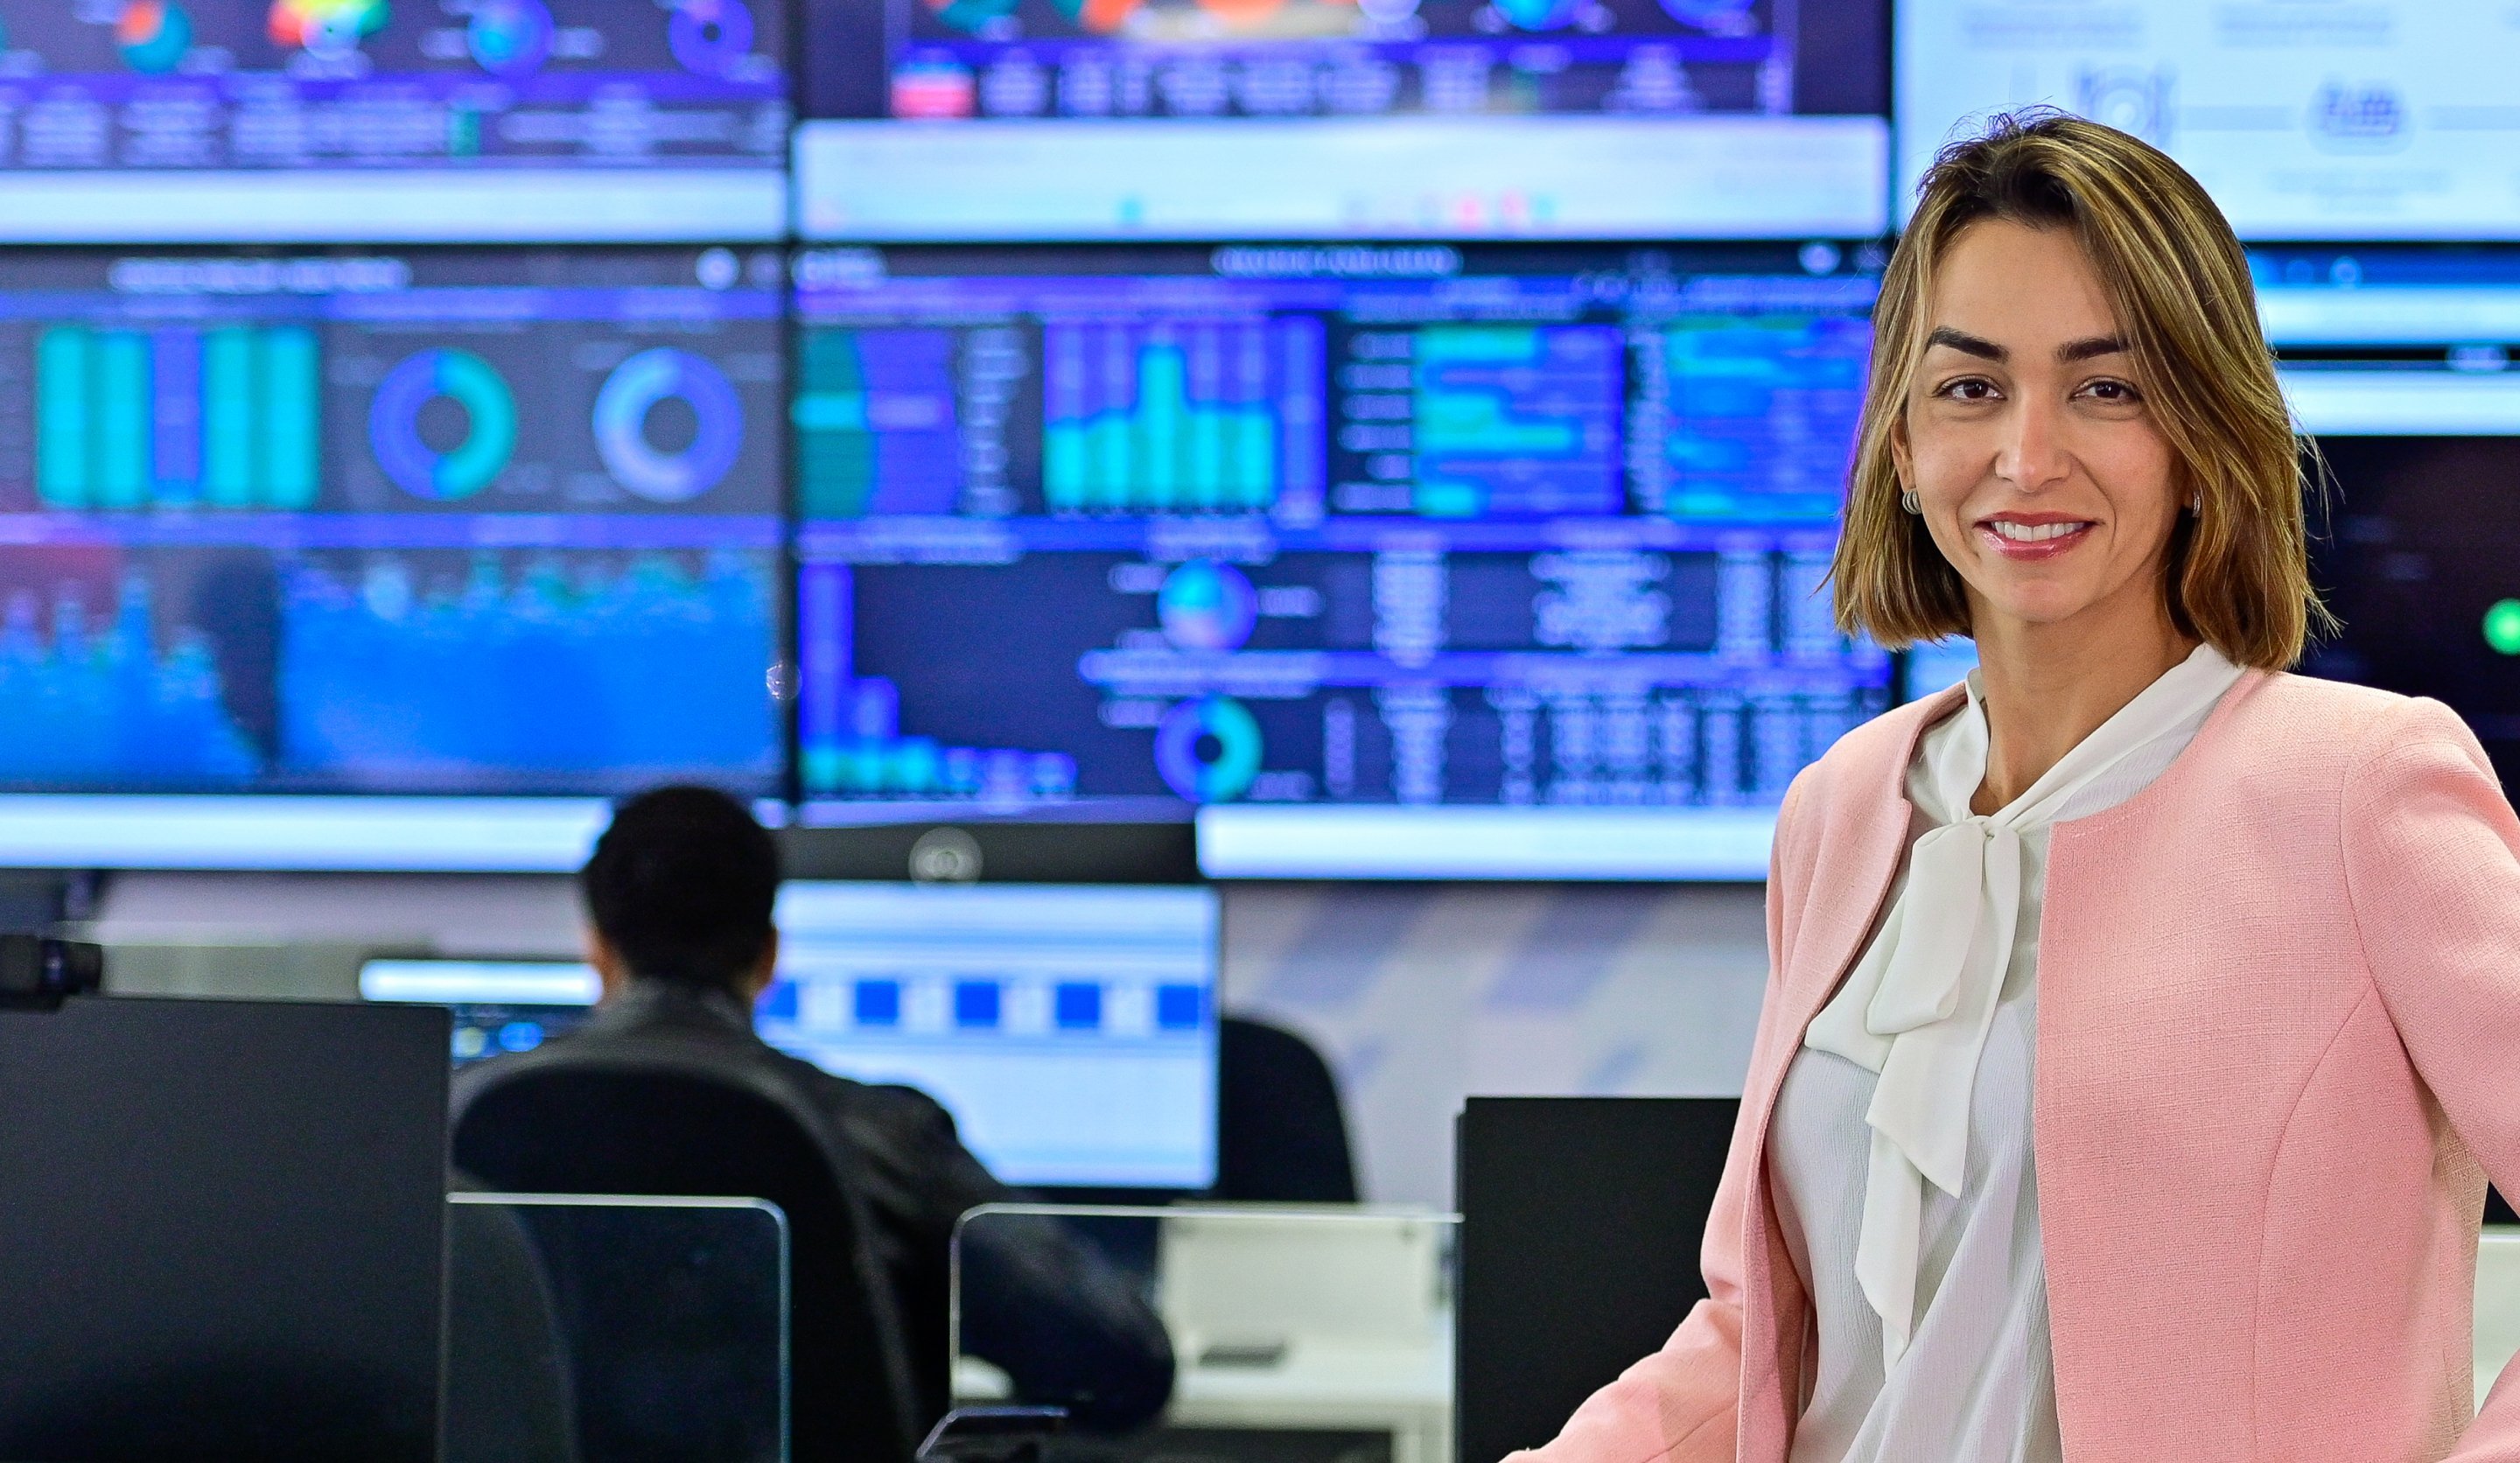 Woman in pink clothes smiling, standing in front of the command center with a lot of computer screens